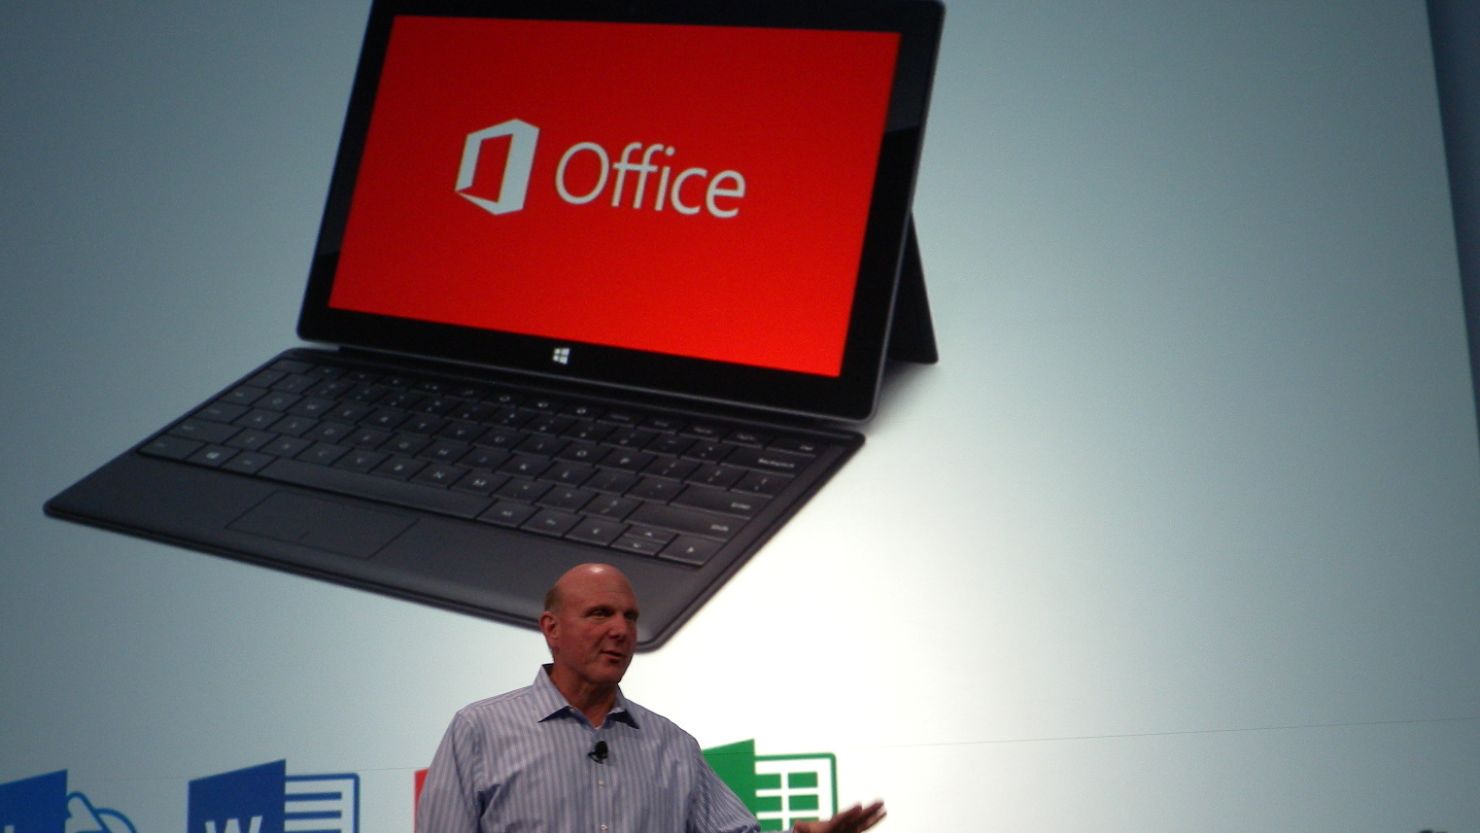 Microsoft CEO Steve Ballmer speaks at a 2012 event rolling out a new version of the company's Office software.